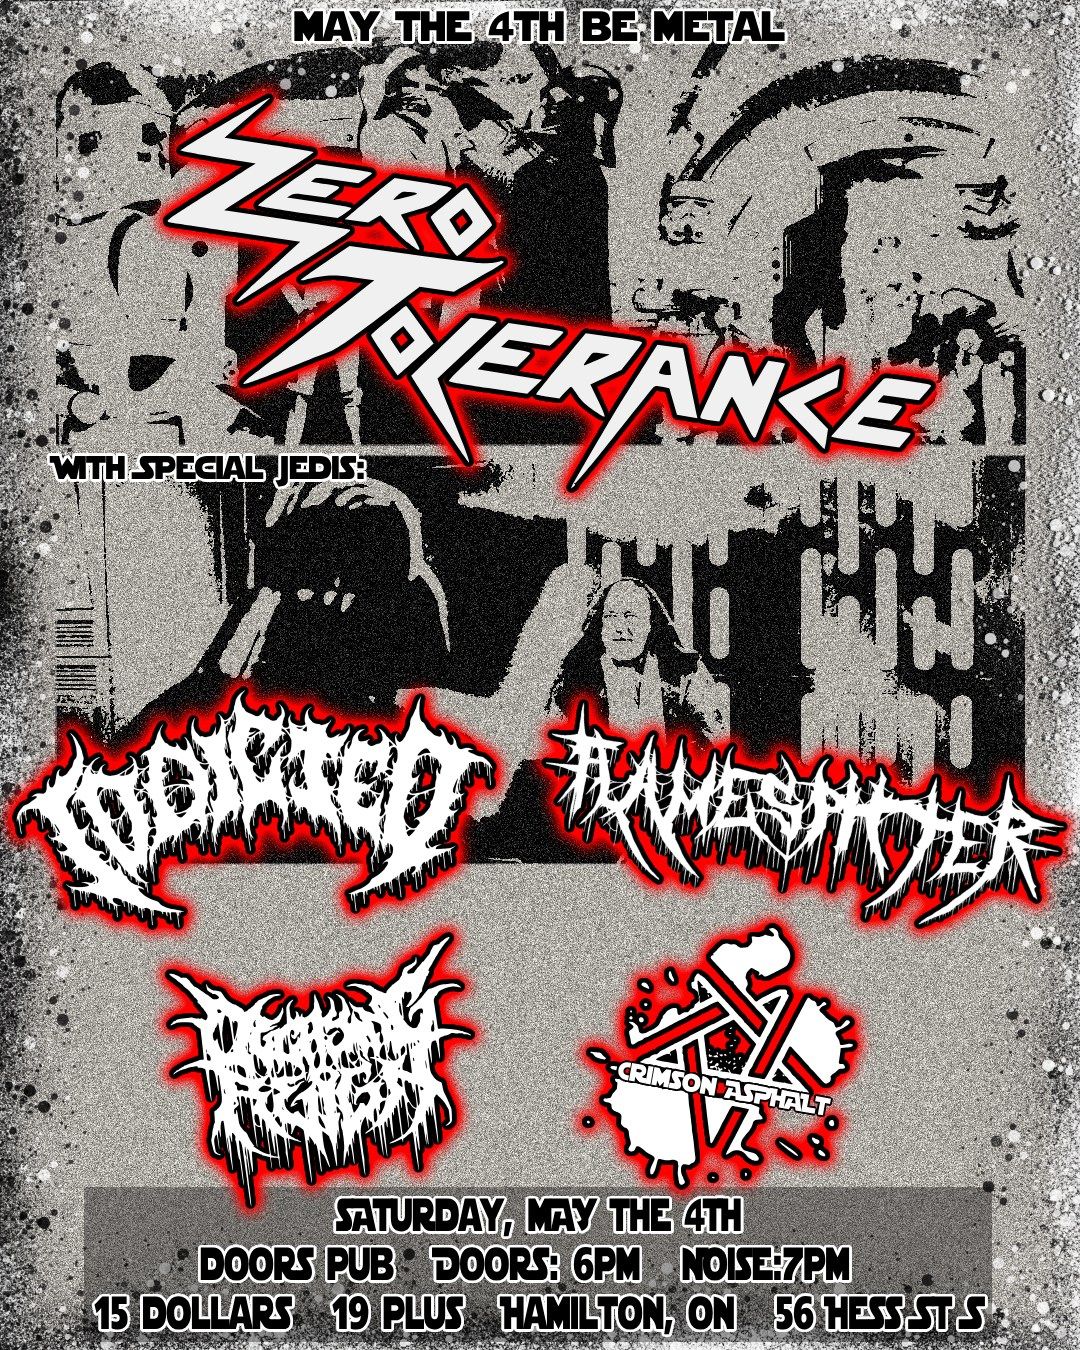 MAY THE 4th BE METAL ft. Zero Tolerance, Iddicted, Flamespitter, Crimson Asphalt, & Decaying Reign